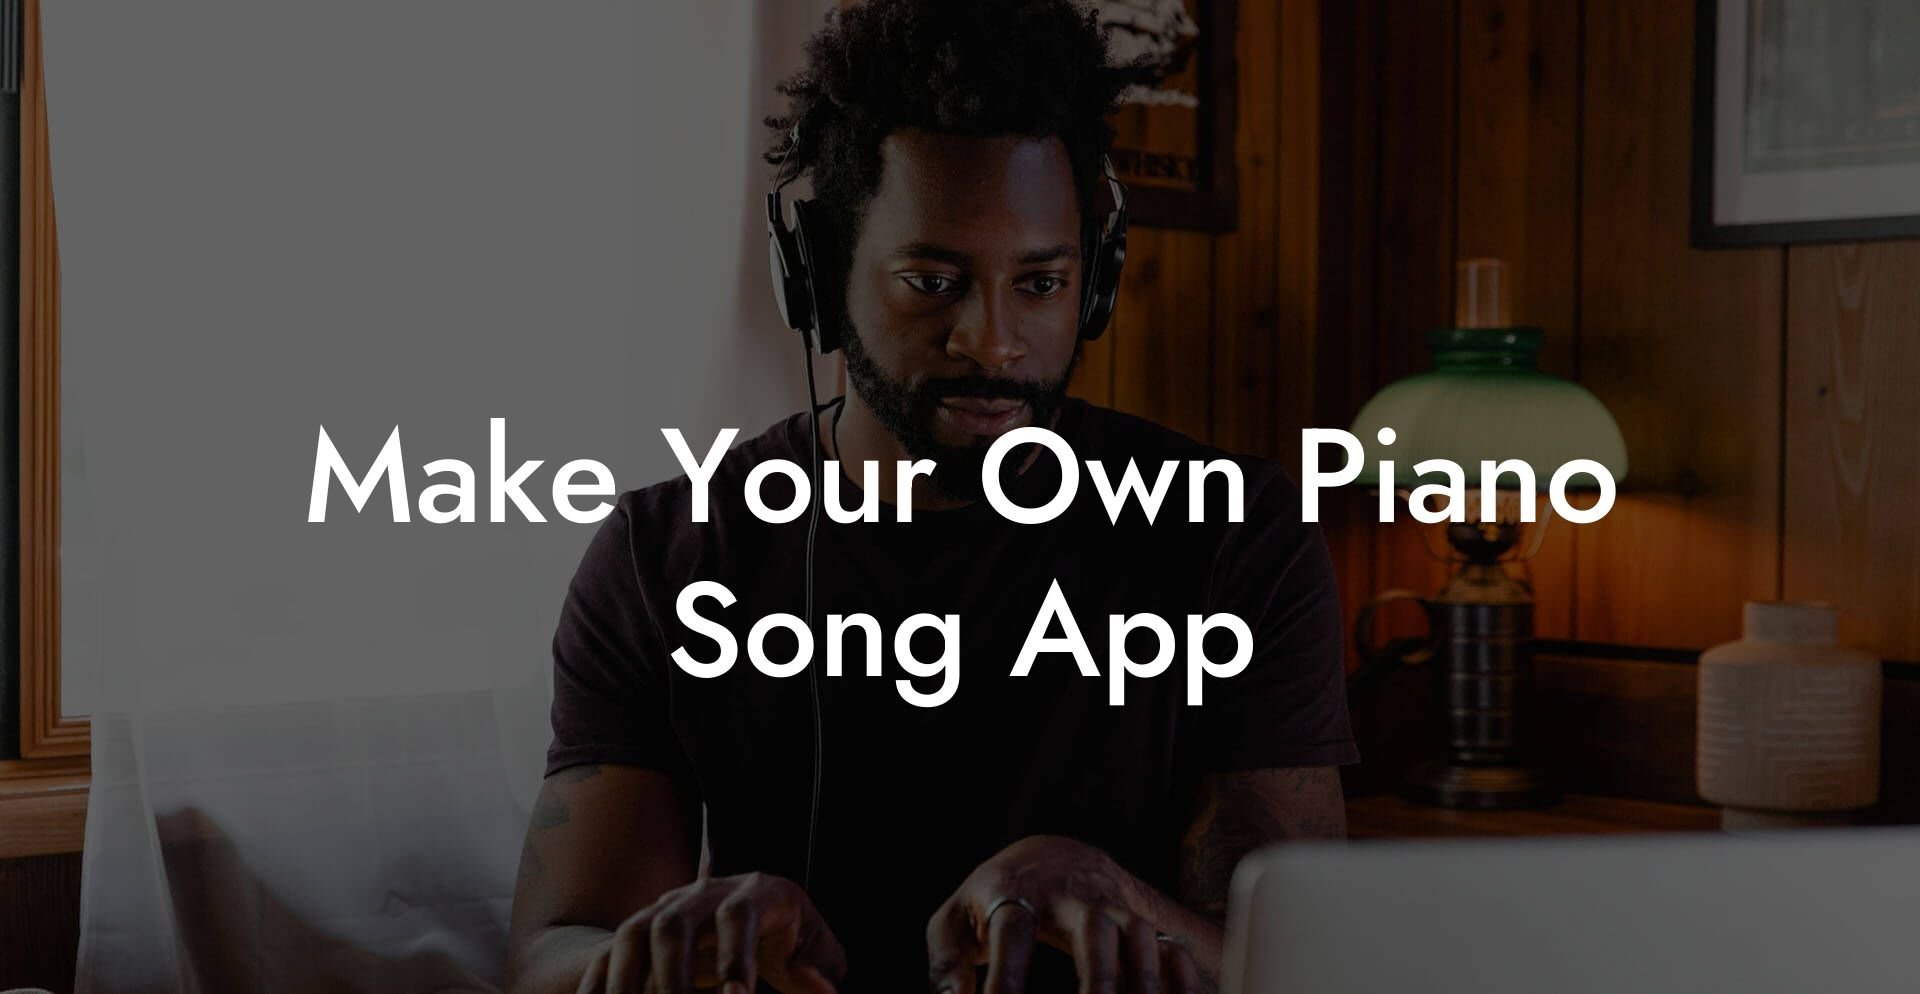 make your own piano song app lyric assistant